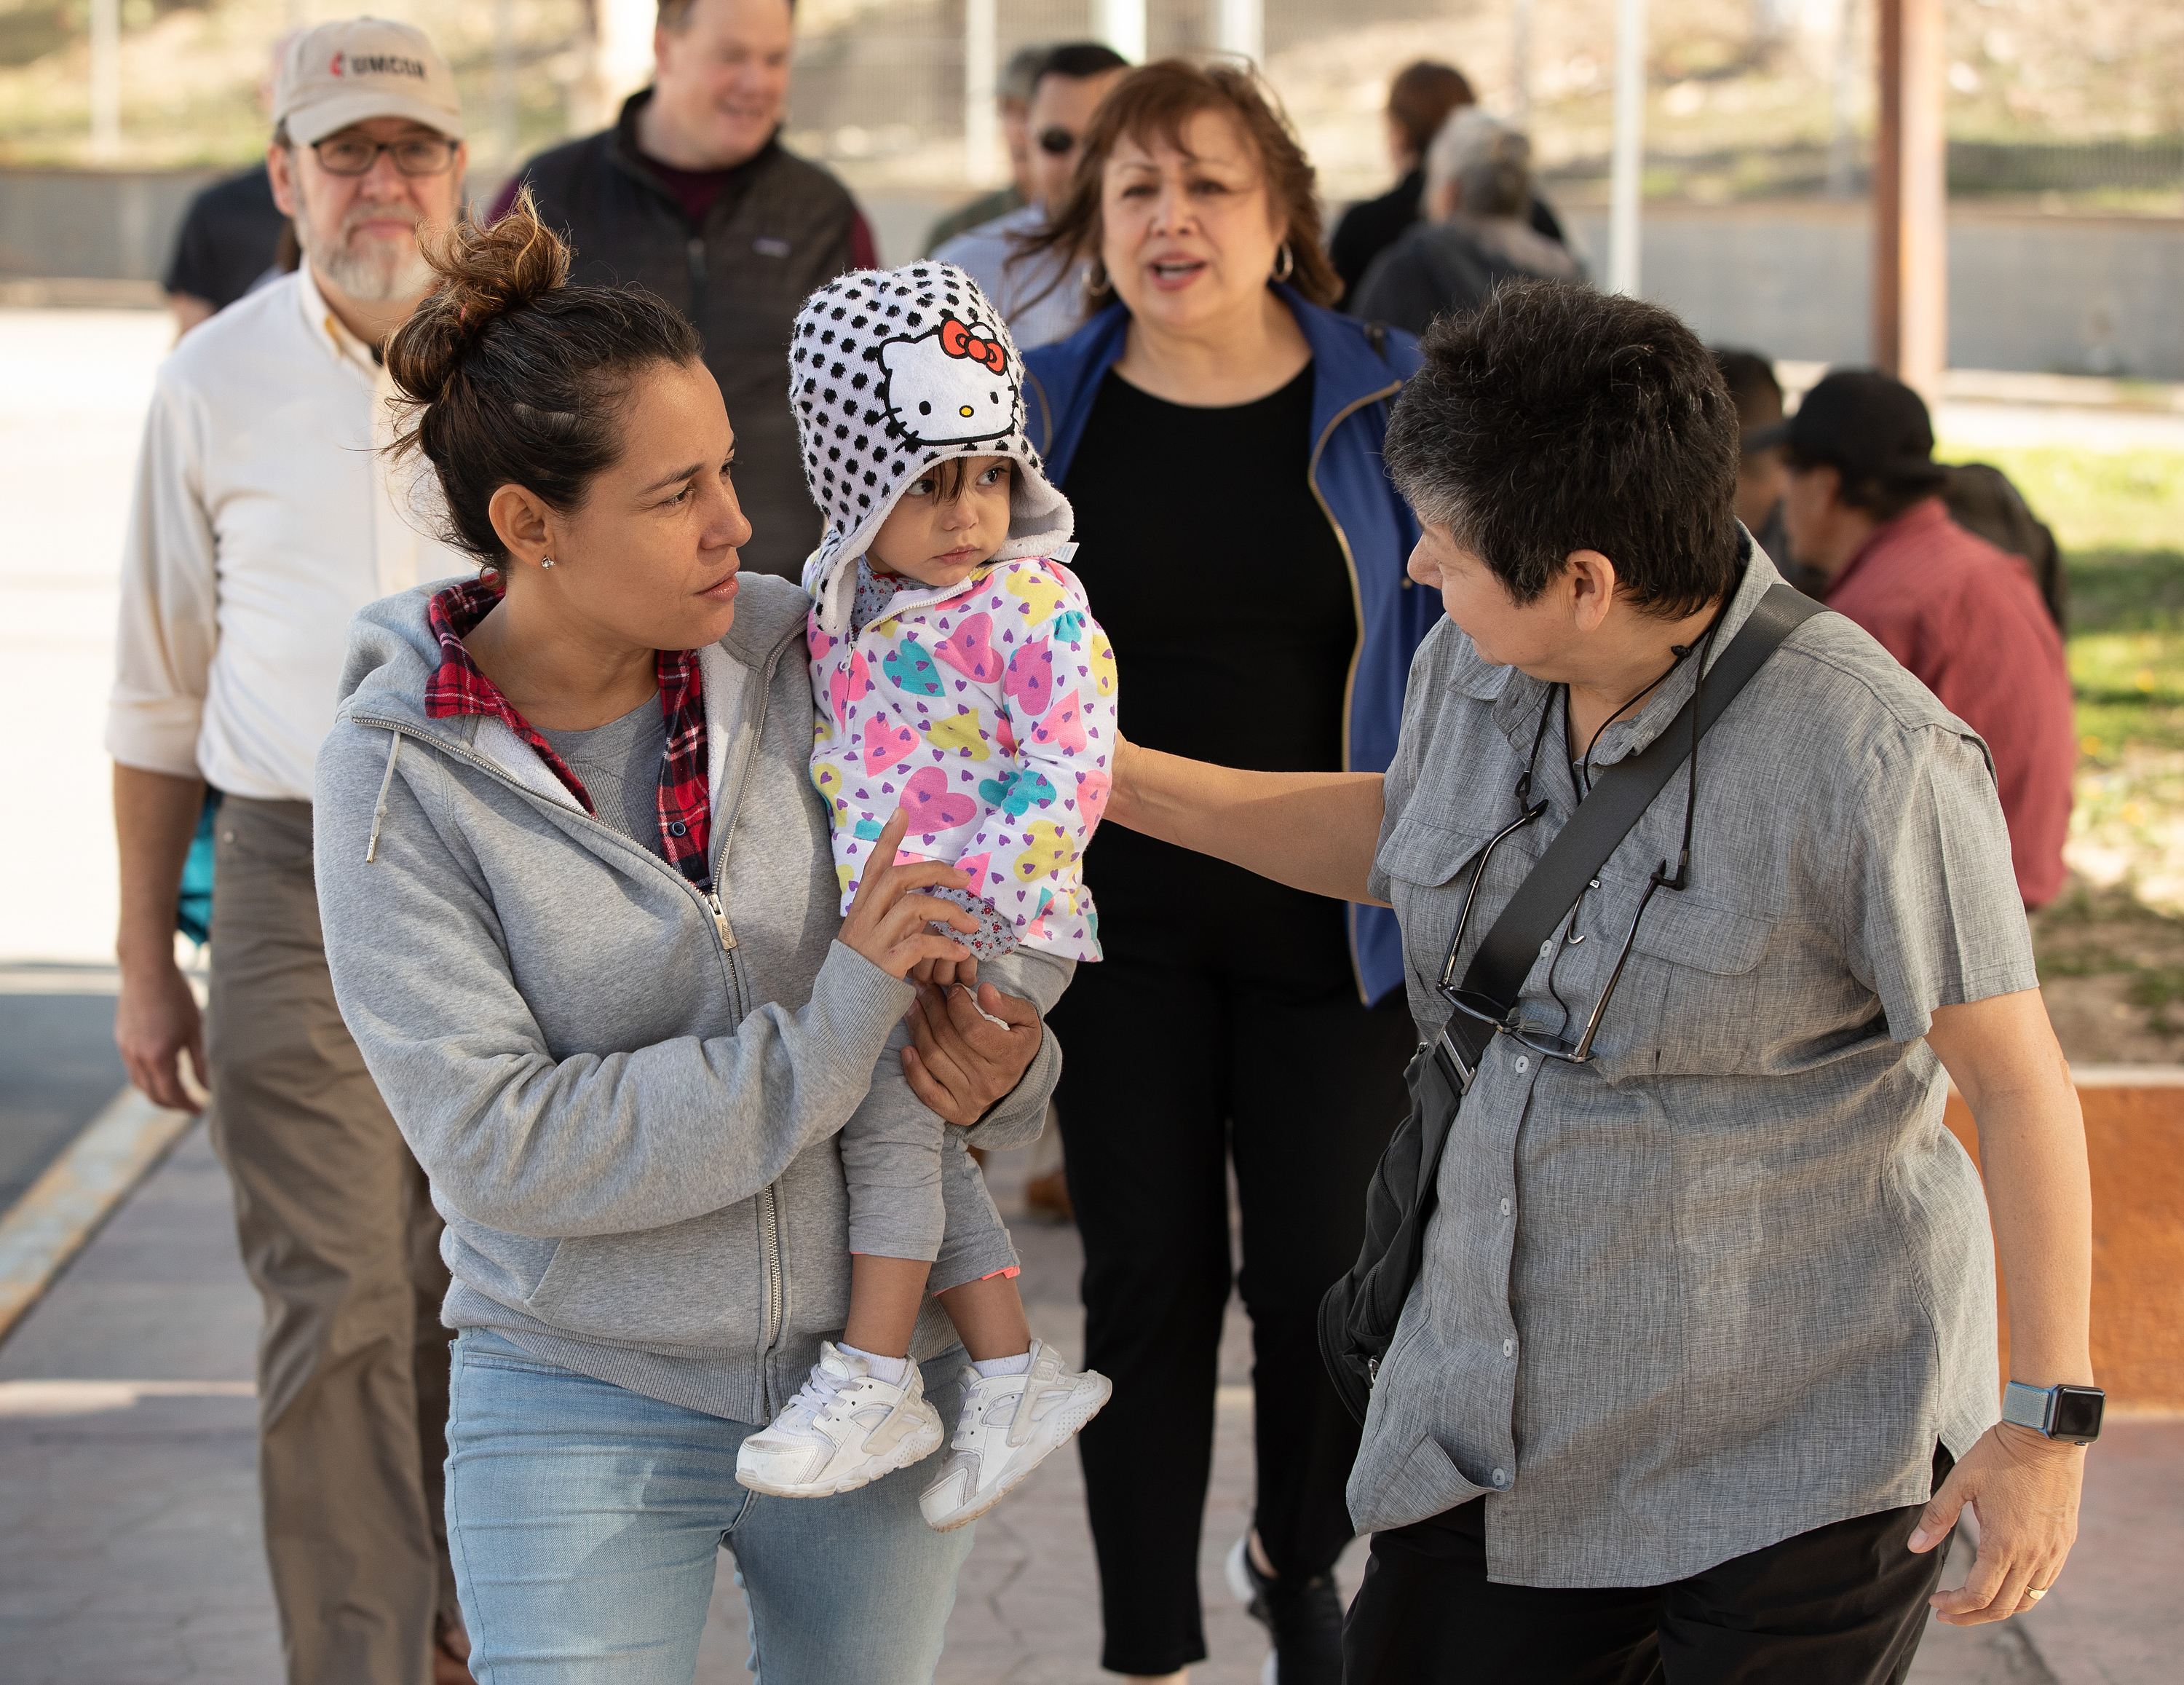 United Methodist deaconess Cindy Johnson (right) walks to buy medicine with Isabél who traveled with her daughter from Nicaragua to Matamoros, Mexico, hoping to request asylum in the U.S. Kassandra, 16 months, was suffering from fever and weight loss while she and her mother waited for their turn to approach the bridge leading to Brownsville, Texas. Johnson, who makes regular visits to the makeshift camp, brought members of the United Methodist Immigration Task Force for a firsthand look at the immigration situation. Photo by Mike DuBose, UMNS.